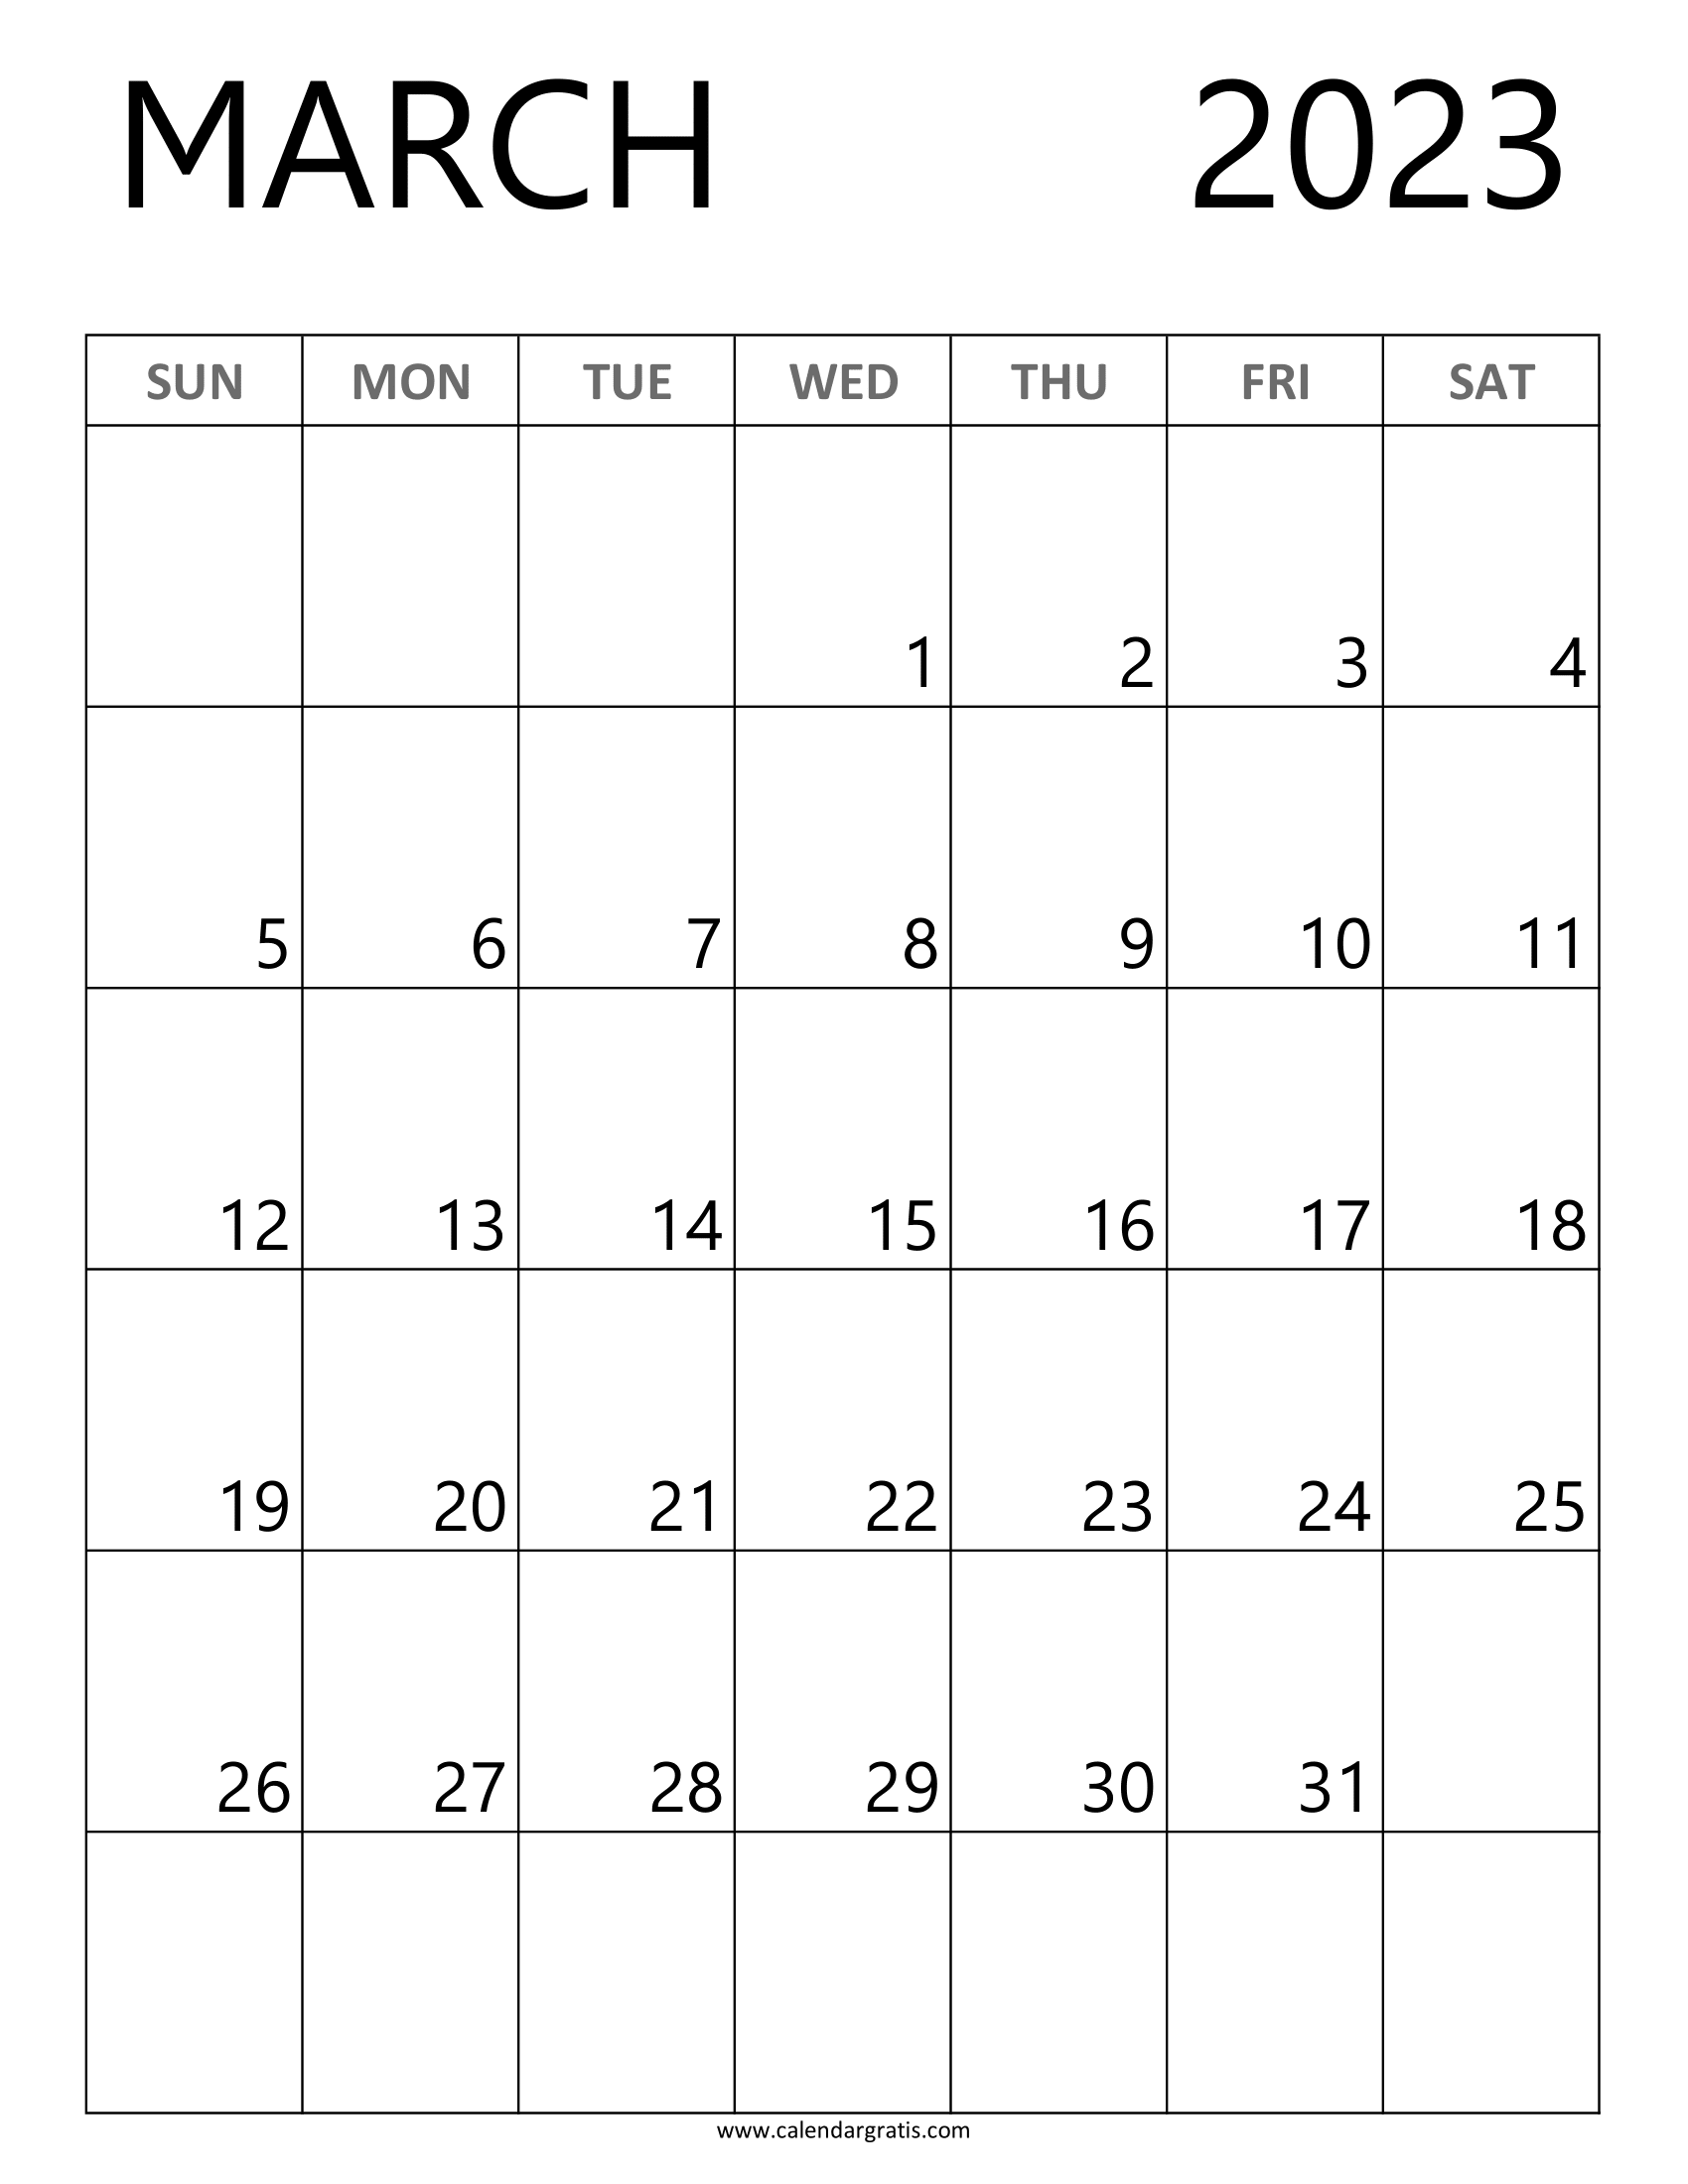 Free Printable A4 Size Calendar for March 2023, Instant downloadable monthly calendar template, vertical layout